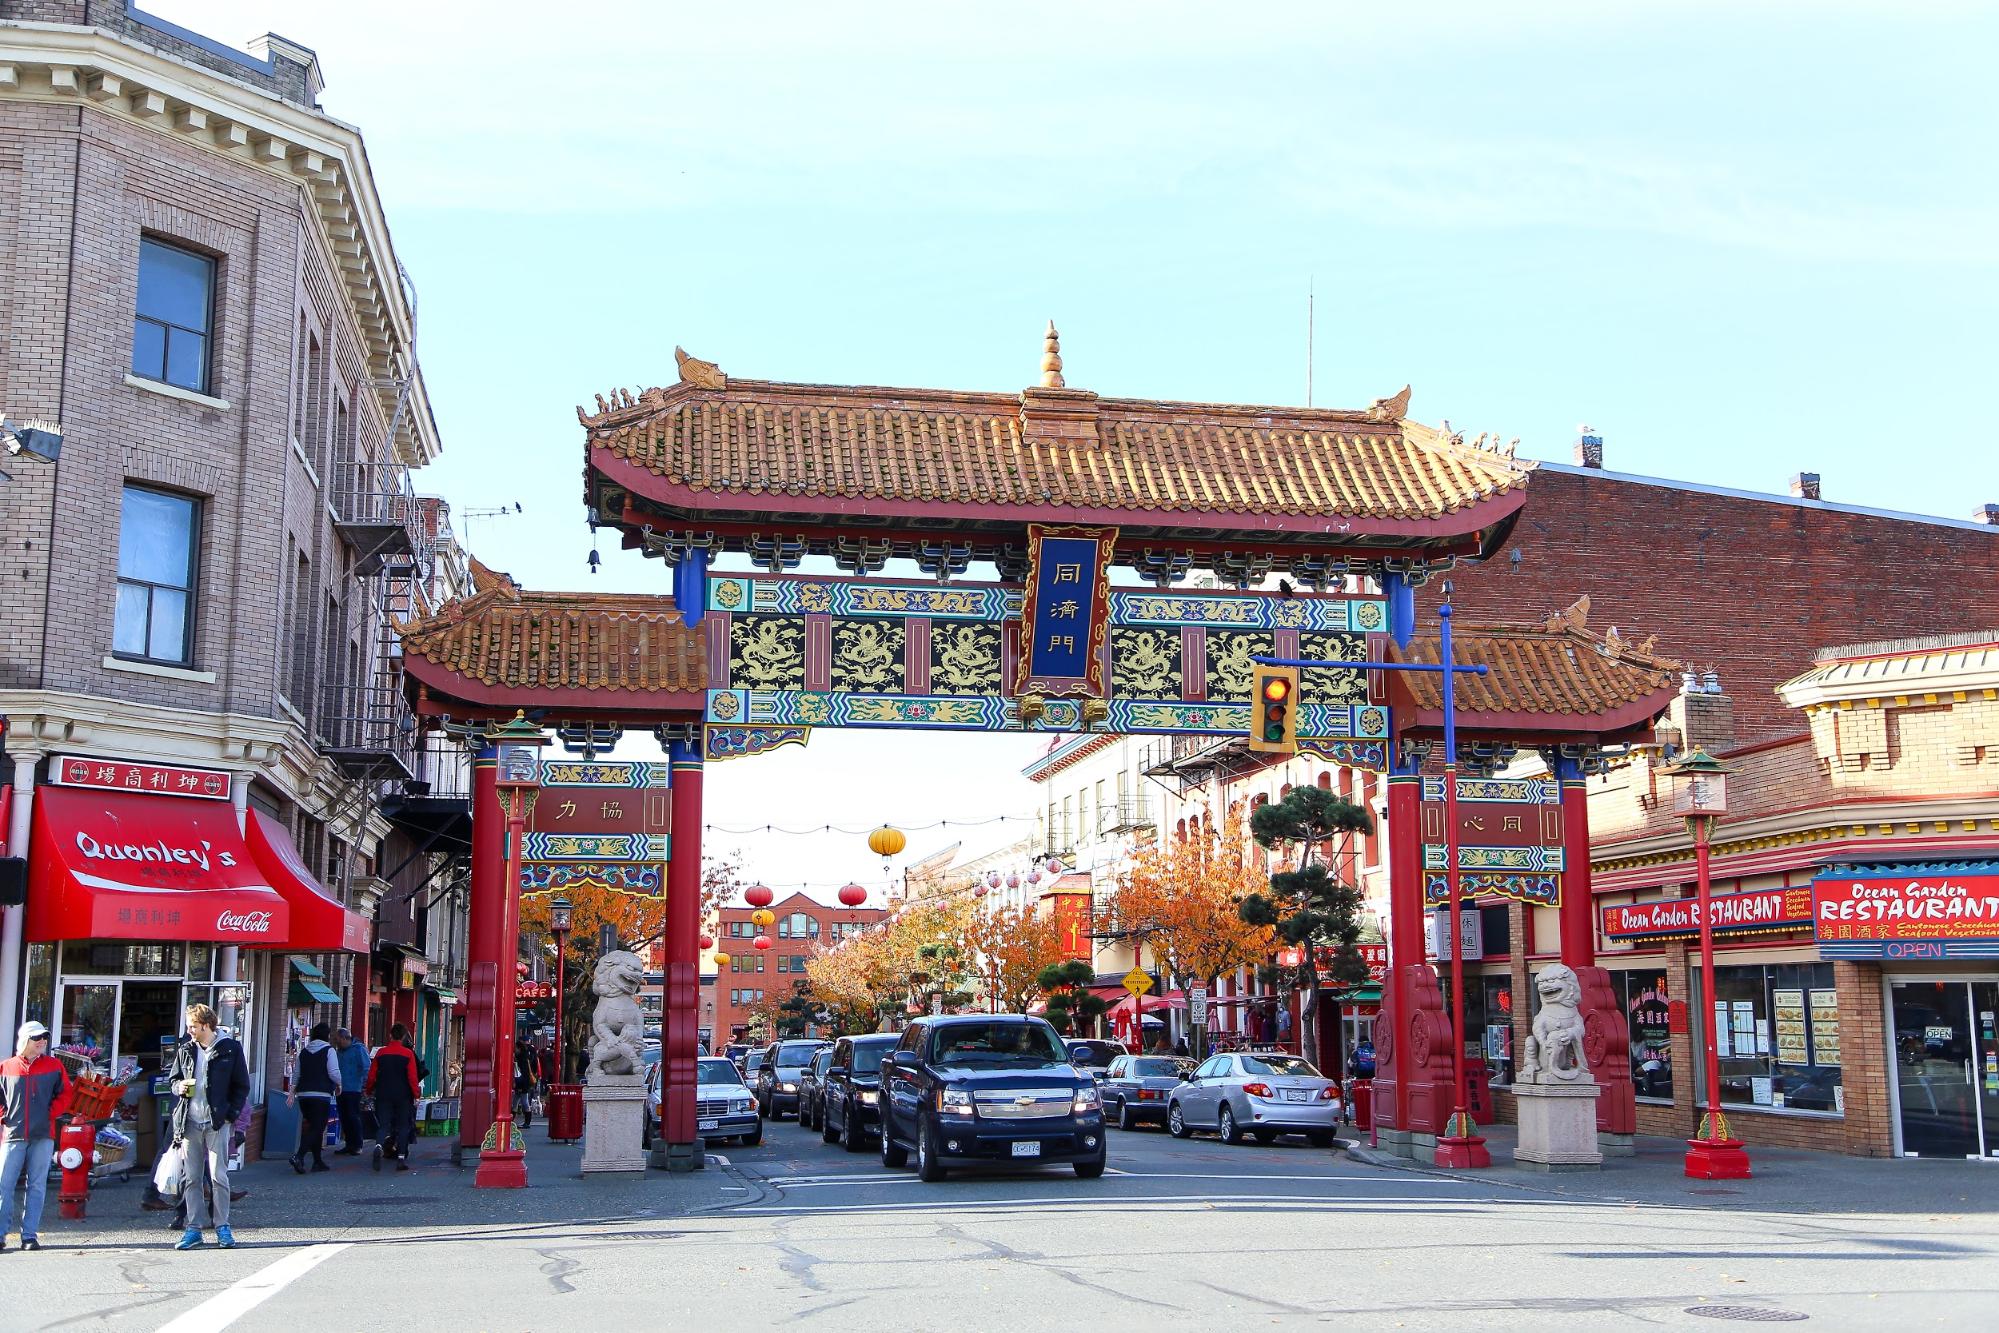 An intricately designed entrance on a city street to Chinatown.